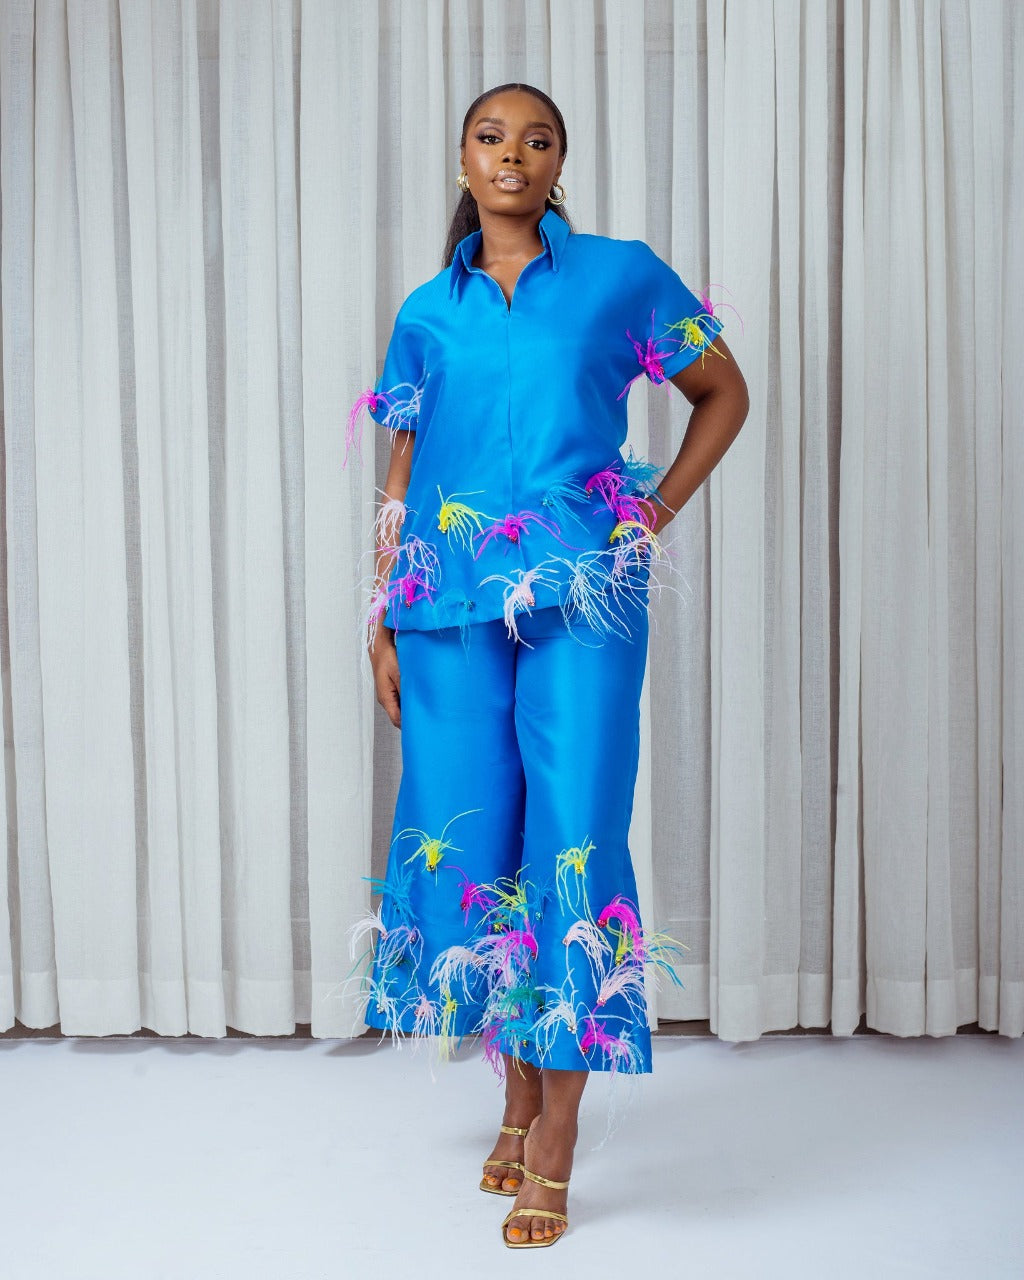 A model wearing a Turquoise shirt with a short sleeve attached with ostrich feathers and a Turquoise pants with ostrich feathers embellishments in front of white curtains